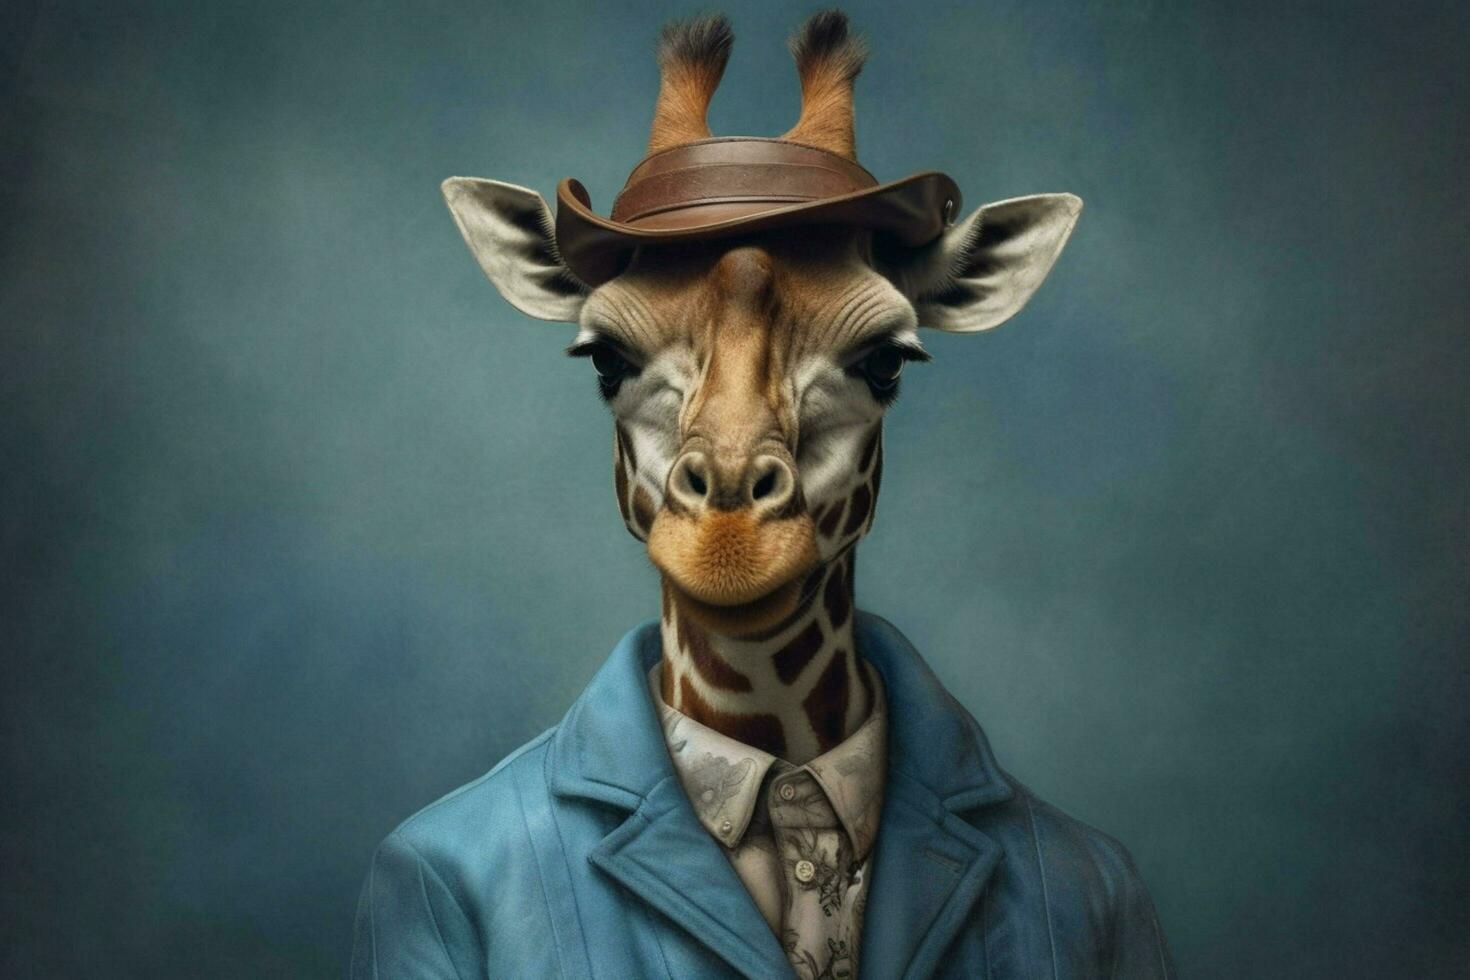 a giraffe with a blue jacket and a blue hat photo